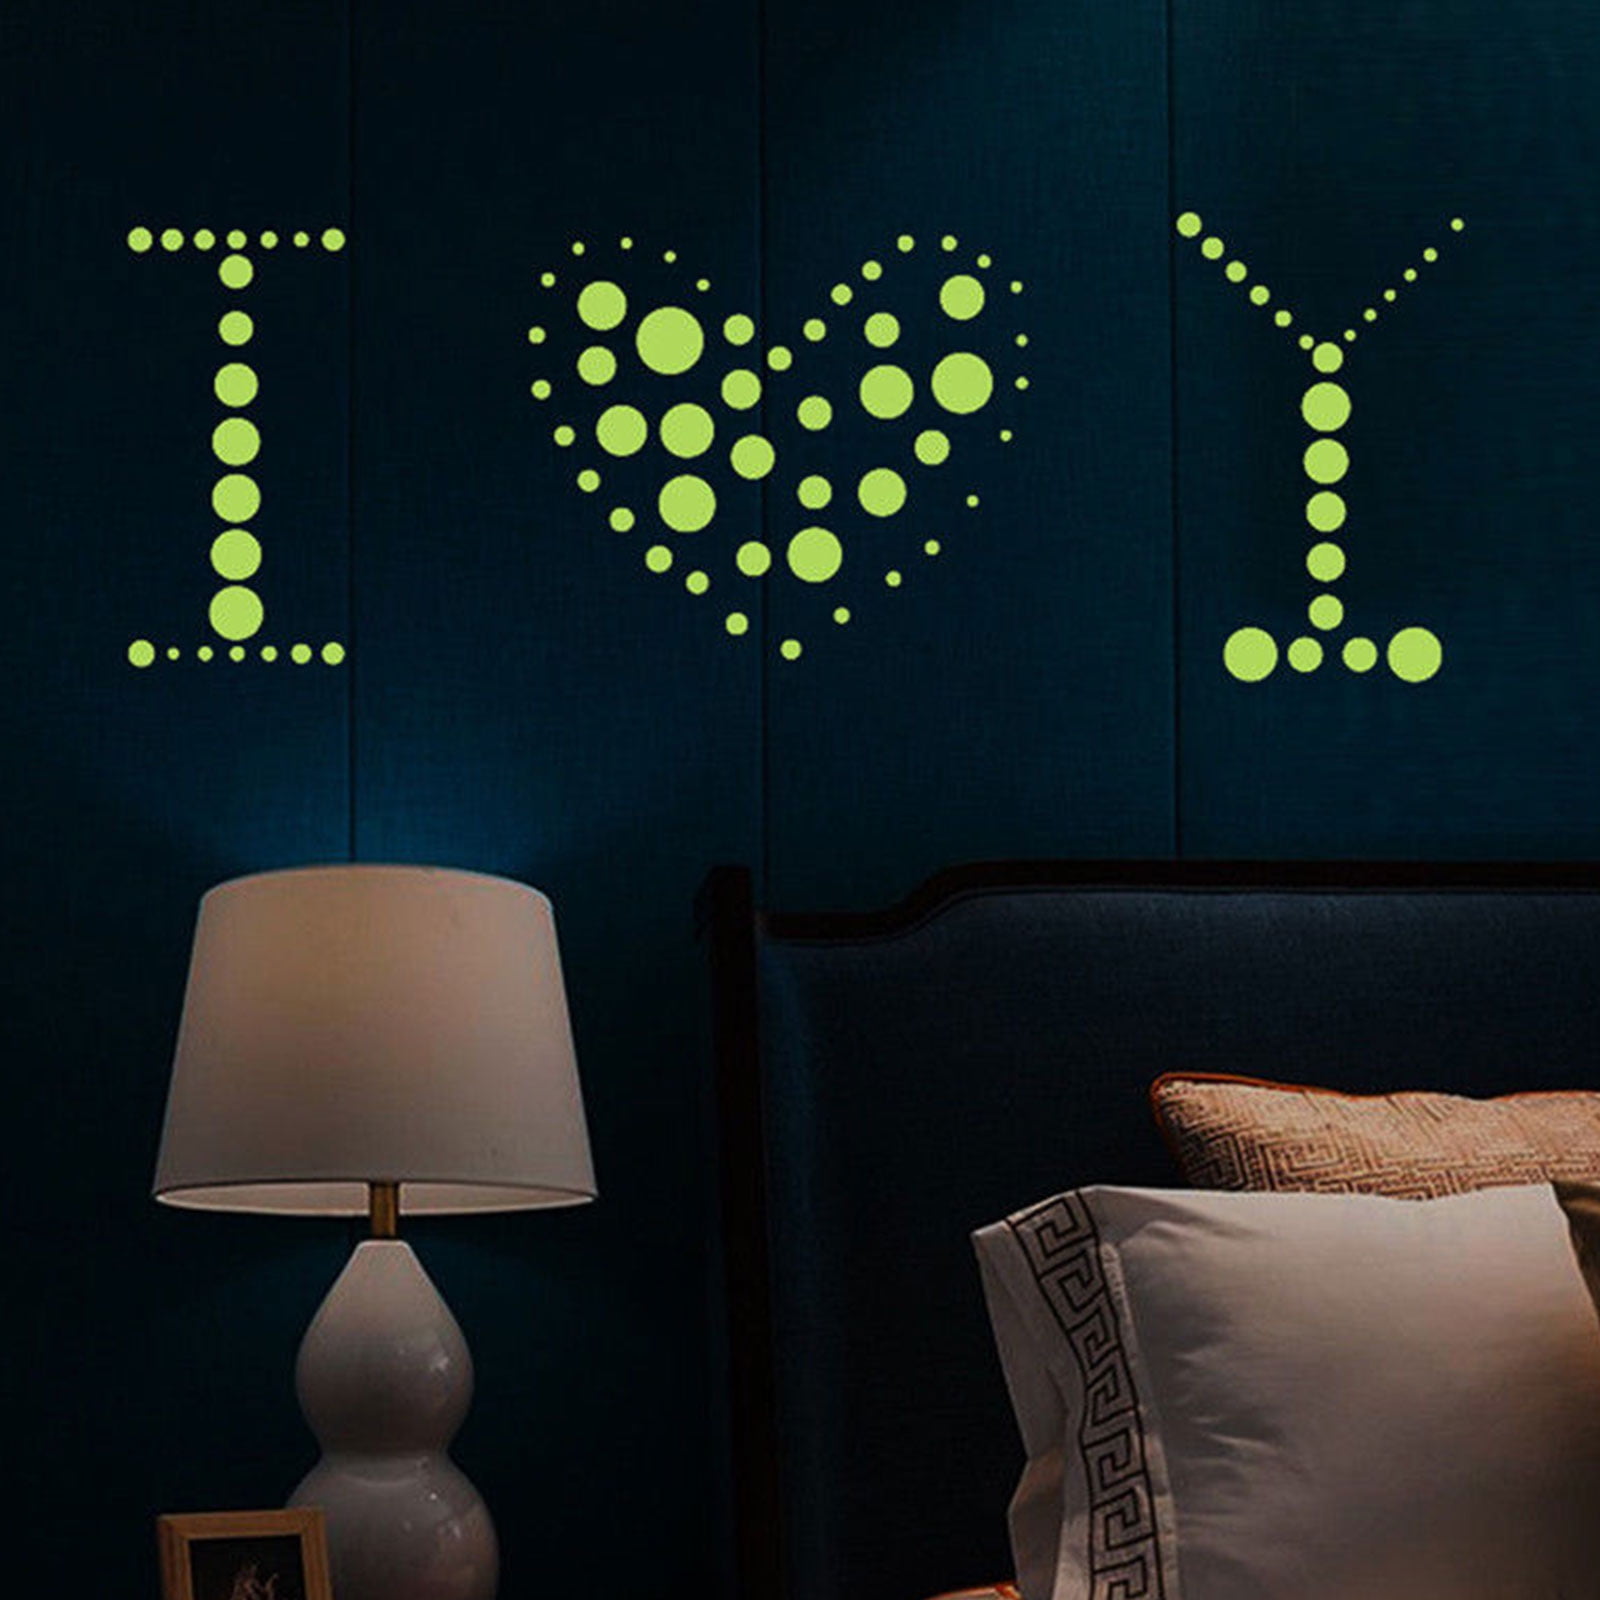 Glow in The Dark Wall Stickers, Buery 407 Pcs Removable Glow in Dark Dots Wall Decals Stickers Room Decor Kit, Adhesive Dots Luminous Ceiling Decals